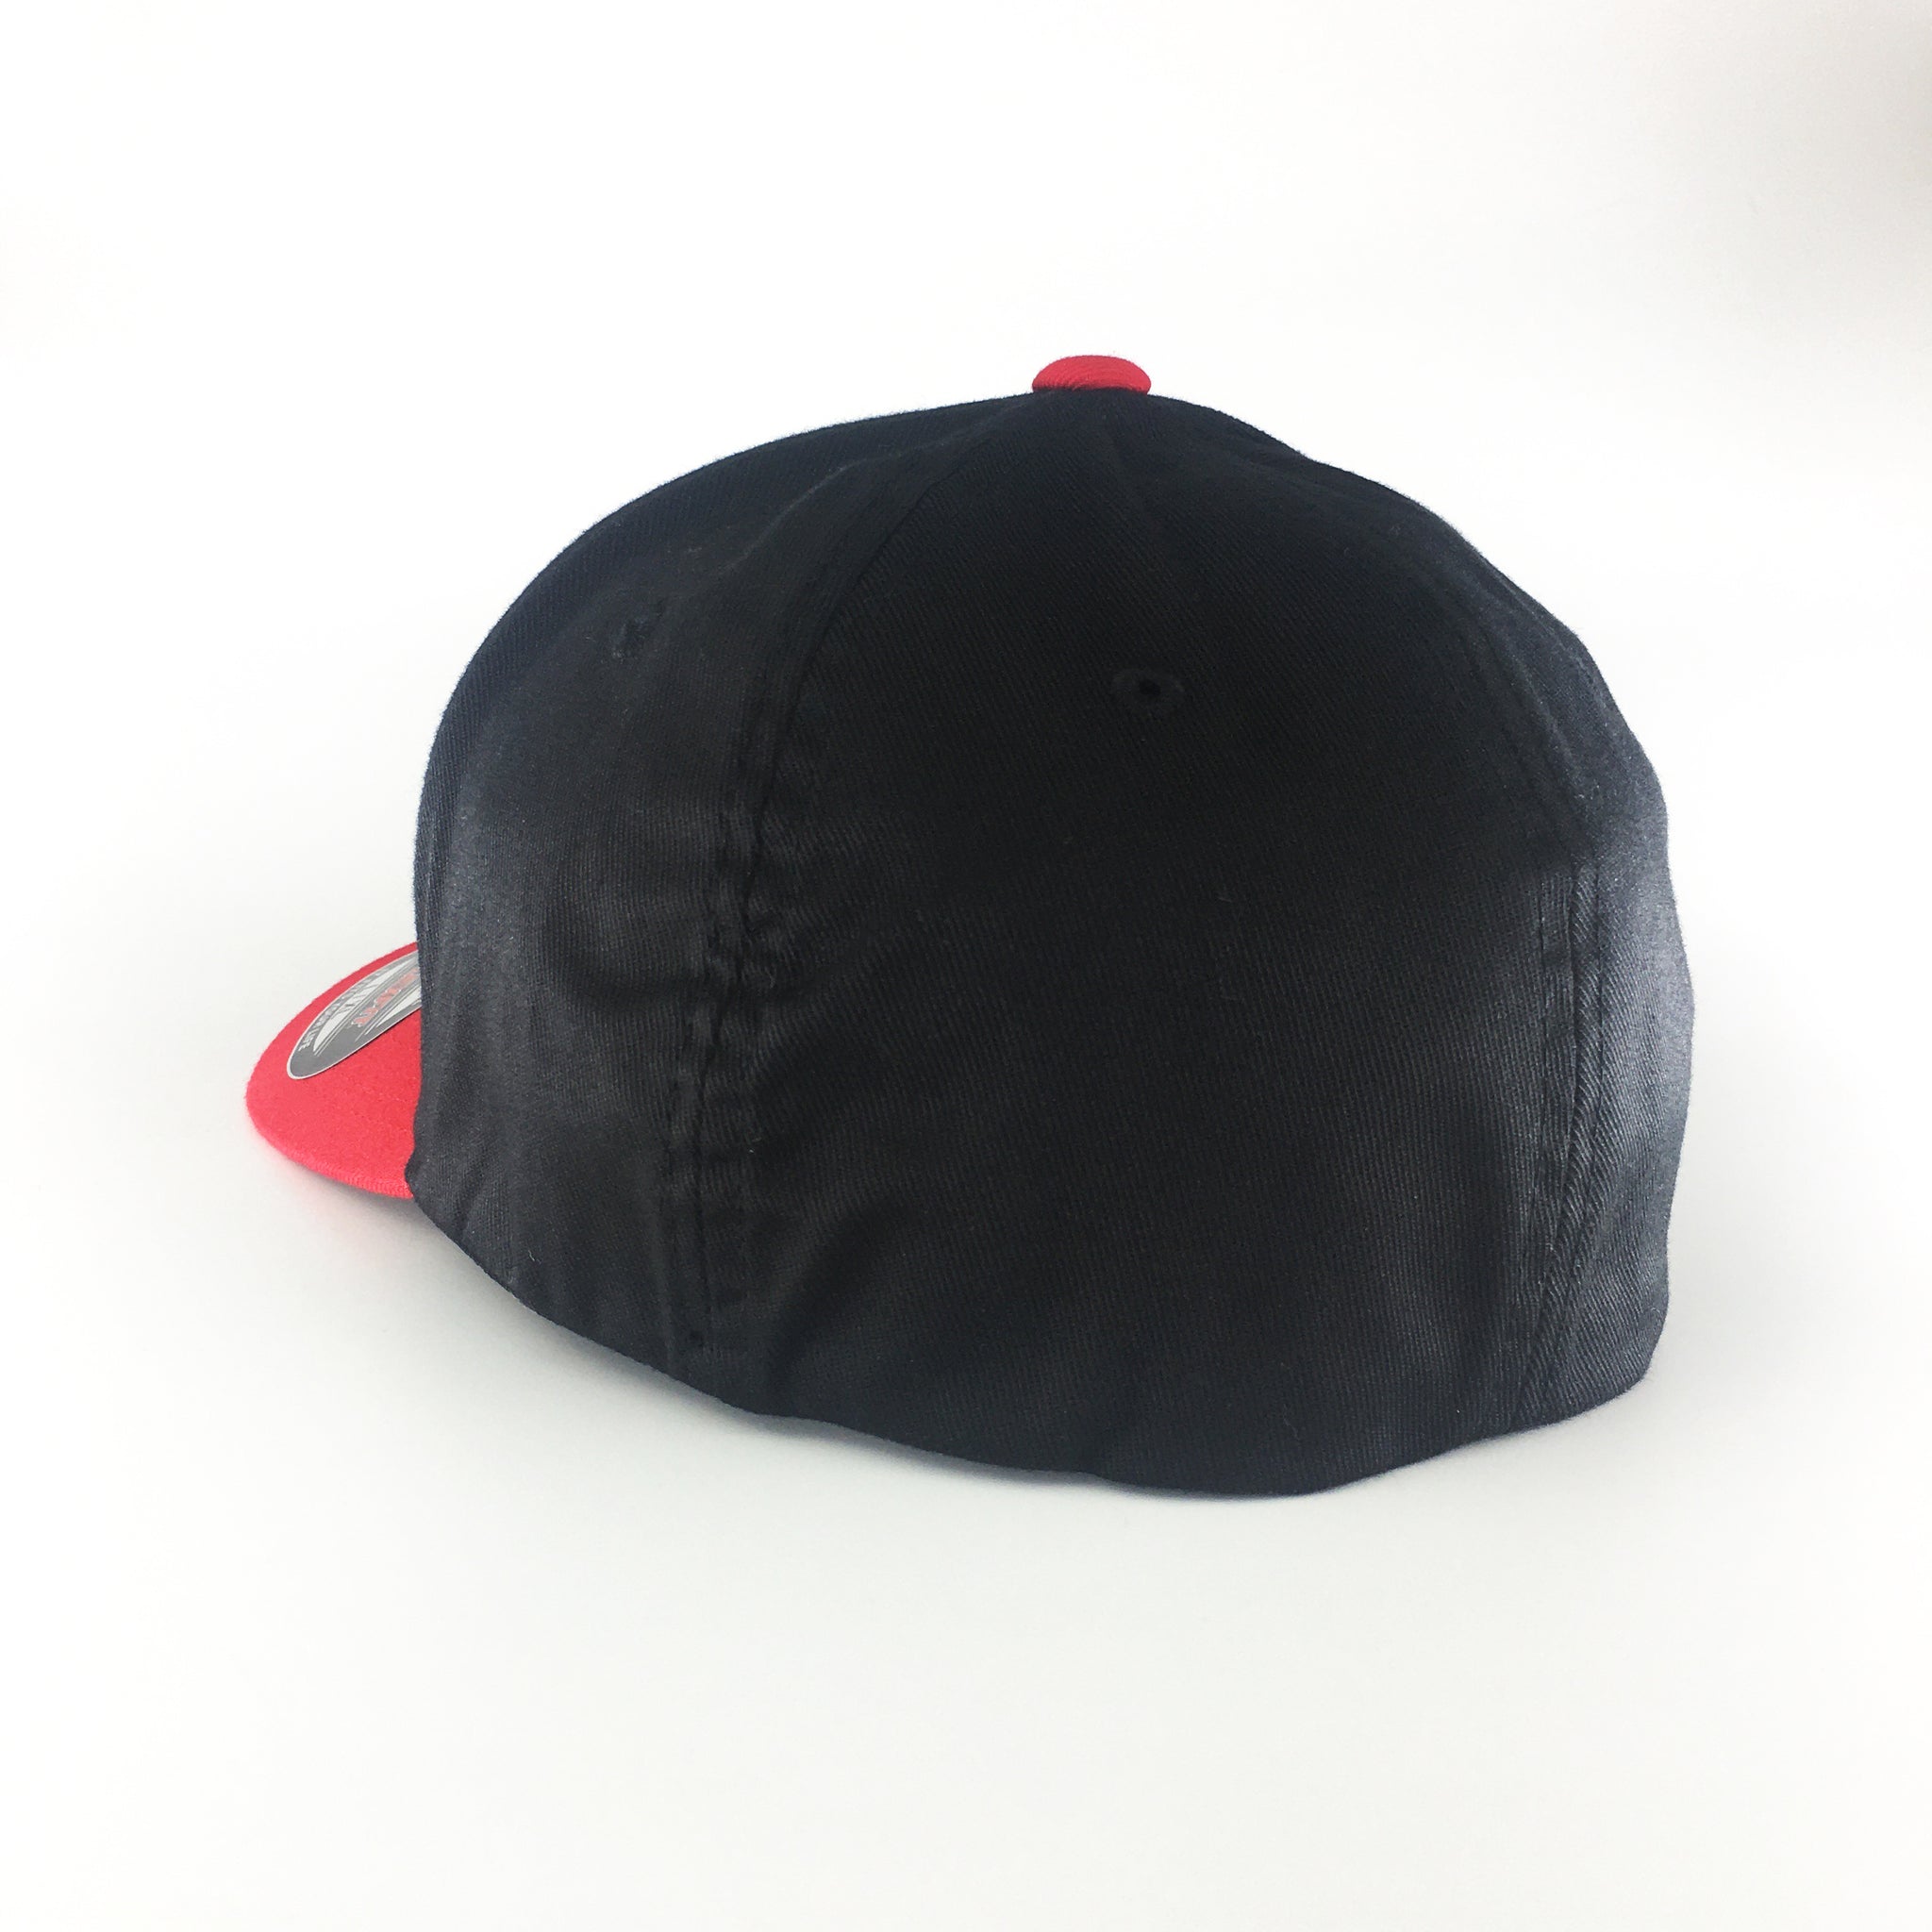 USA Fitted 43 and Flexfit – two Red FortyThree™ Black toned